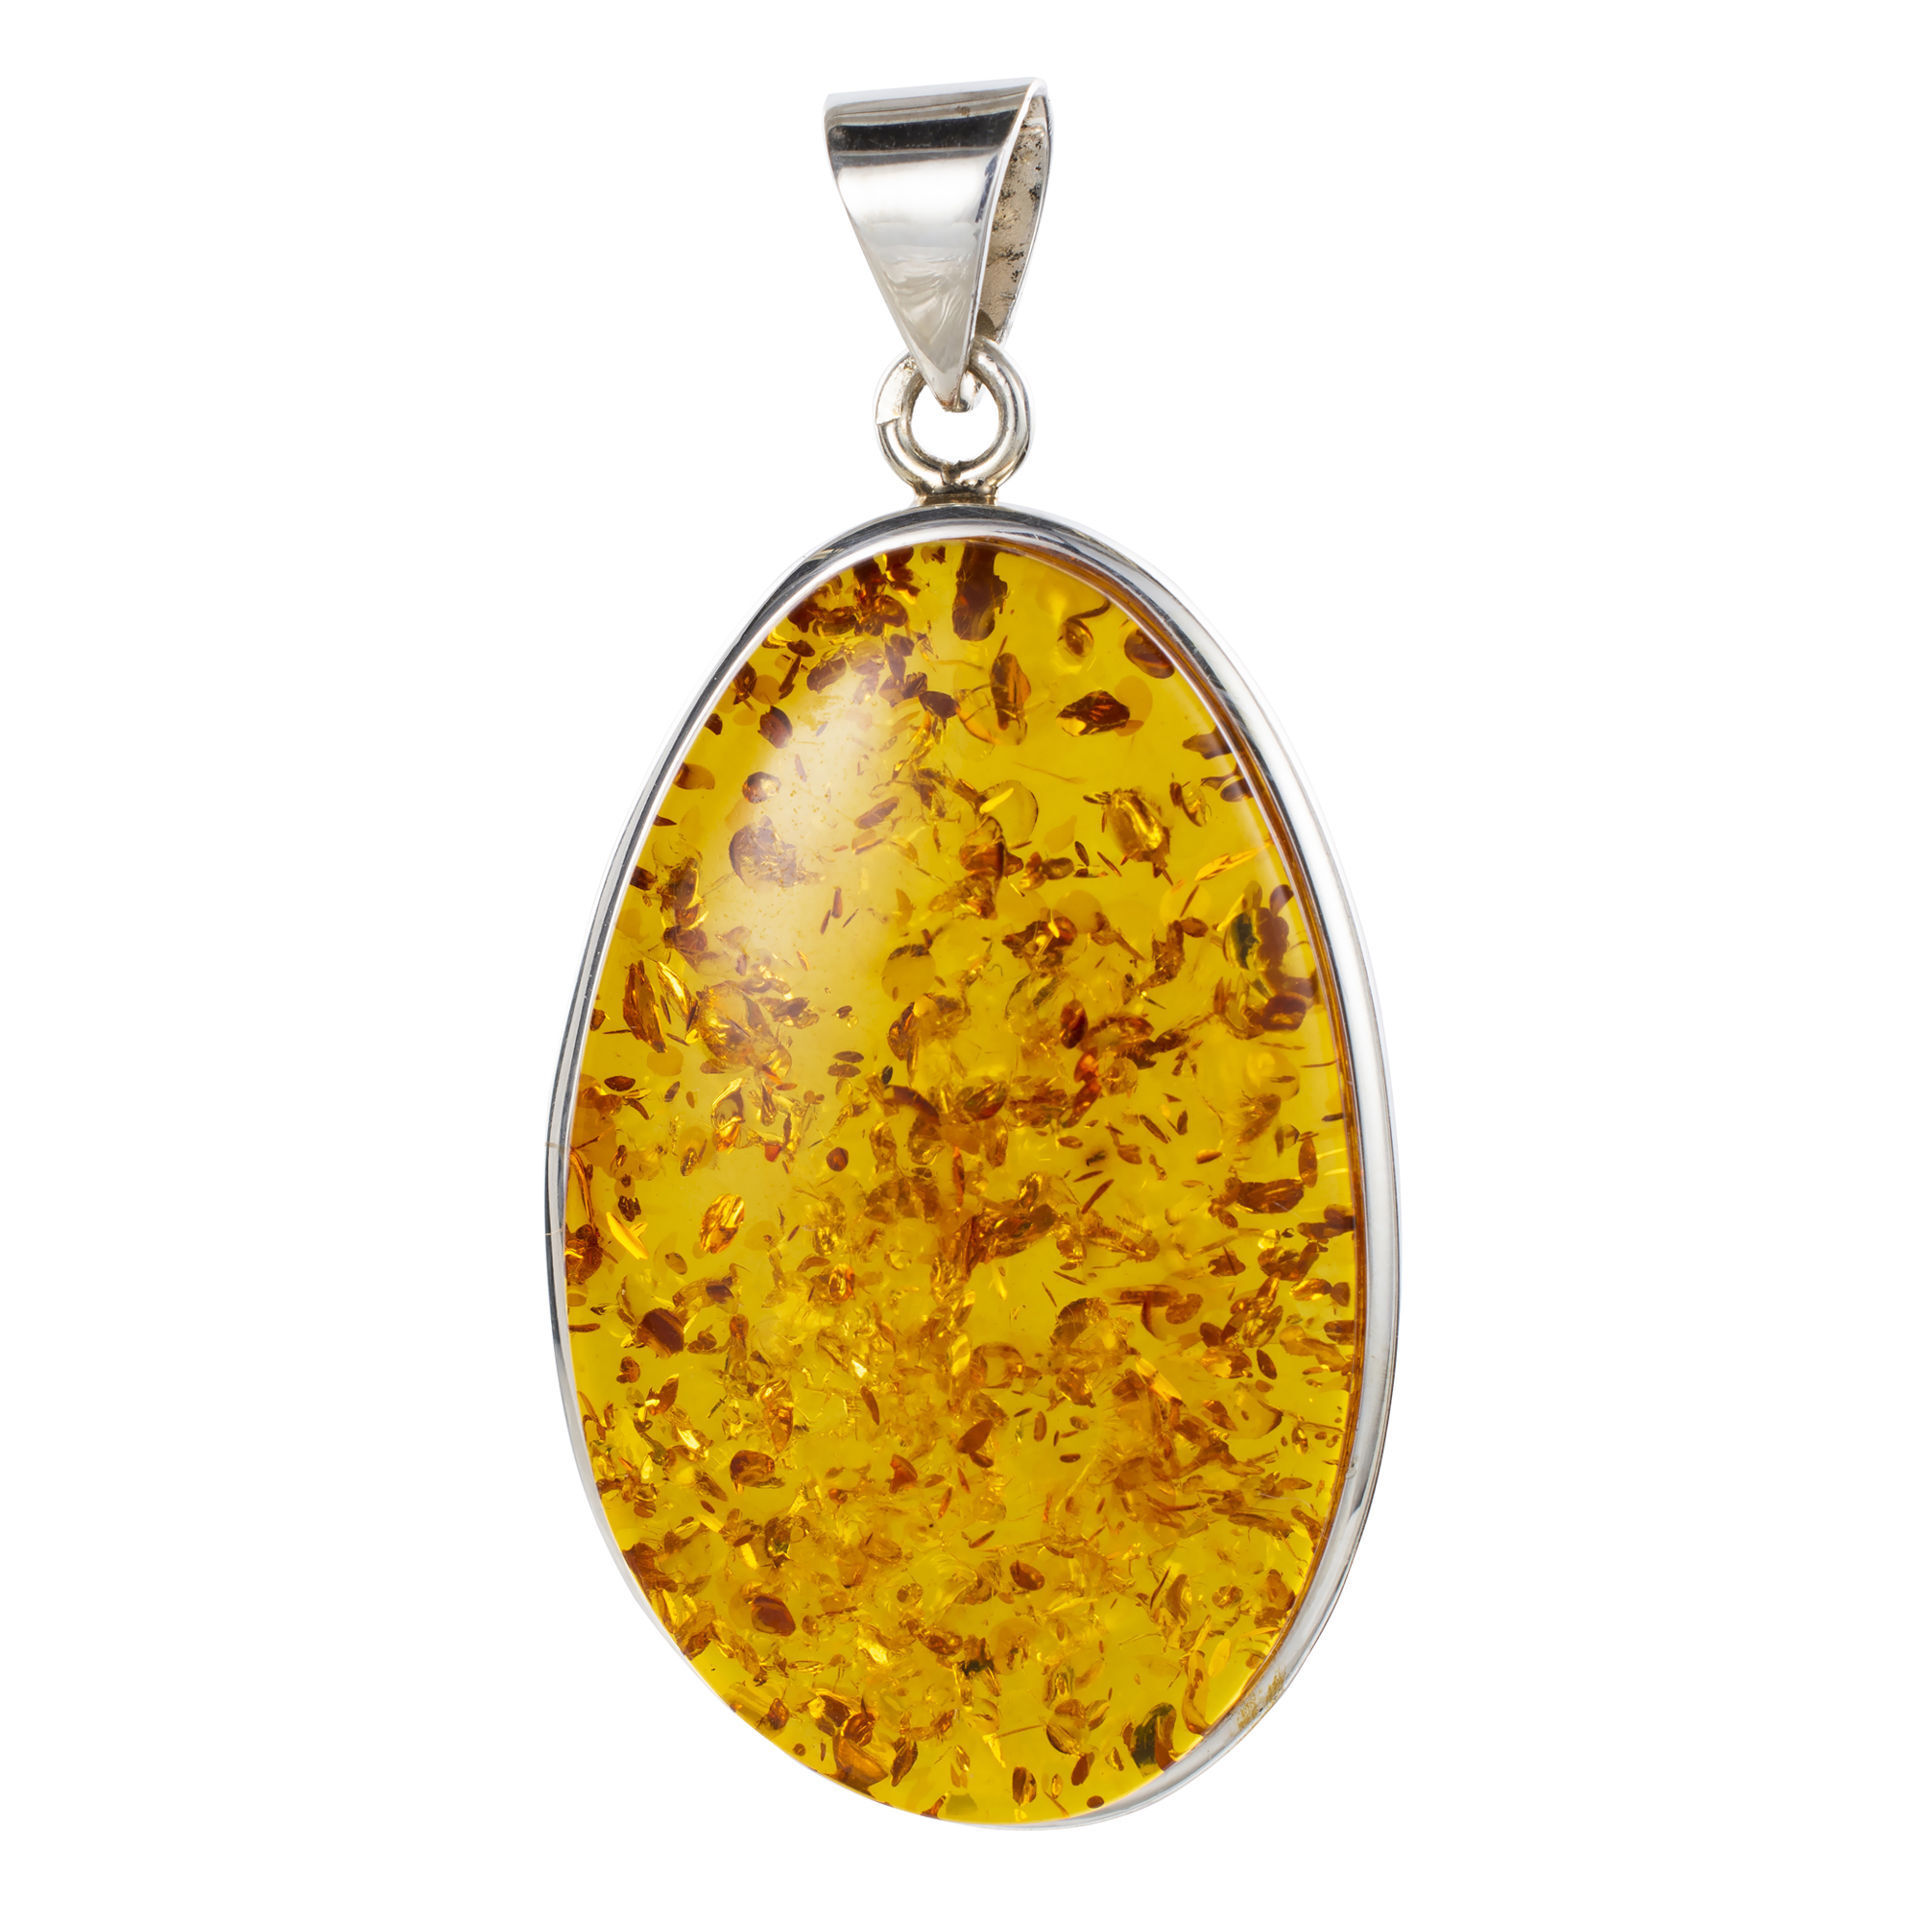 Sterling Silver and Oval Shaped Baltic Honey Amber Pendant